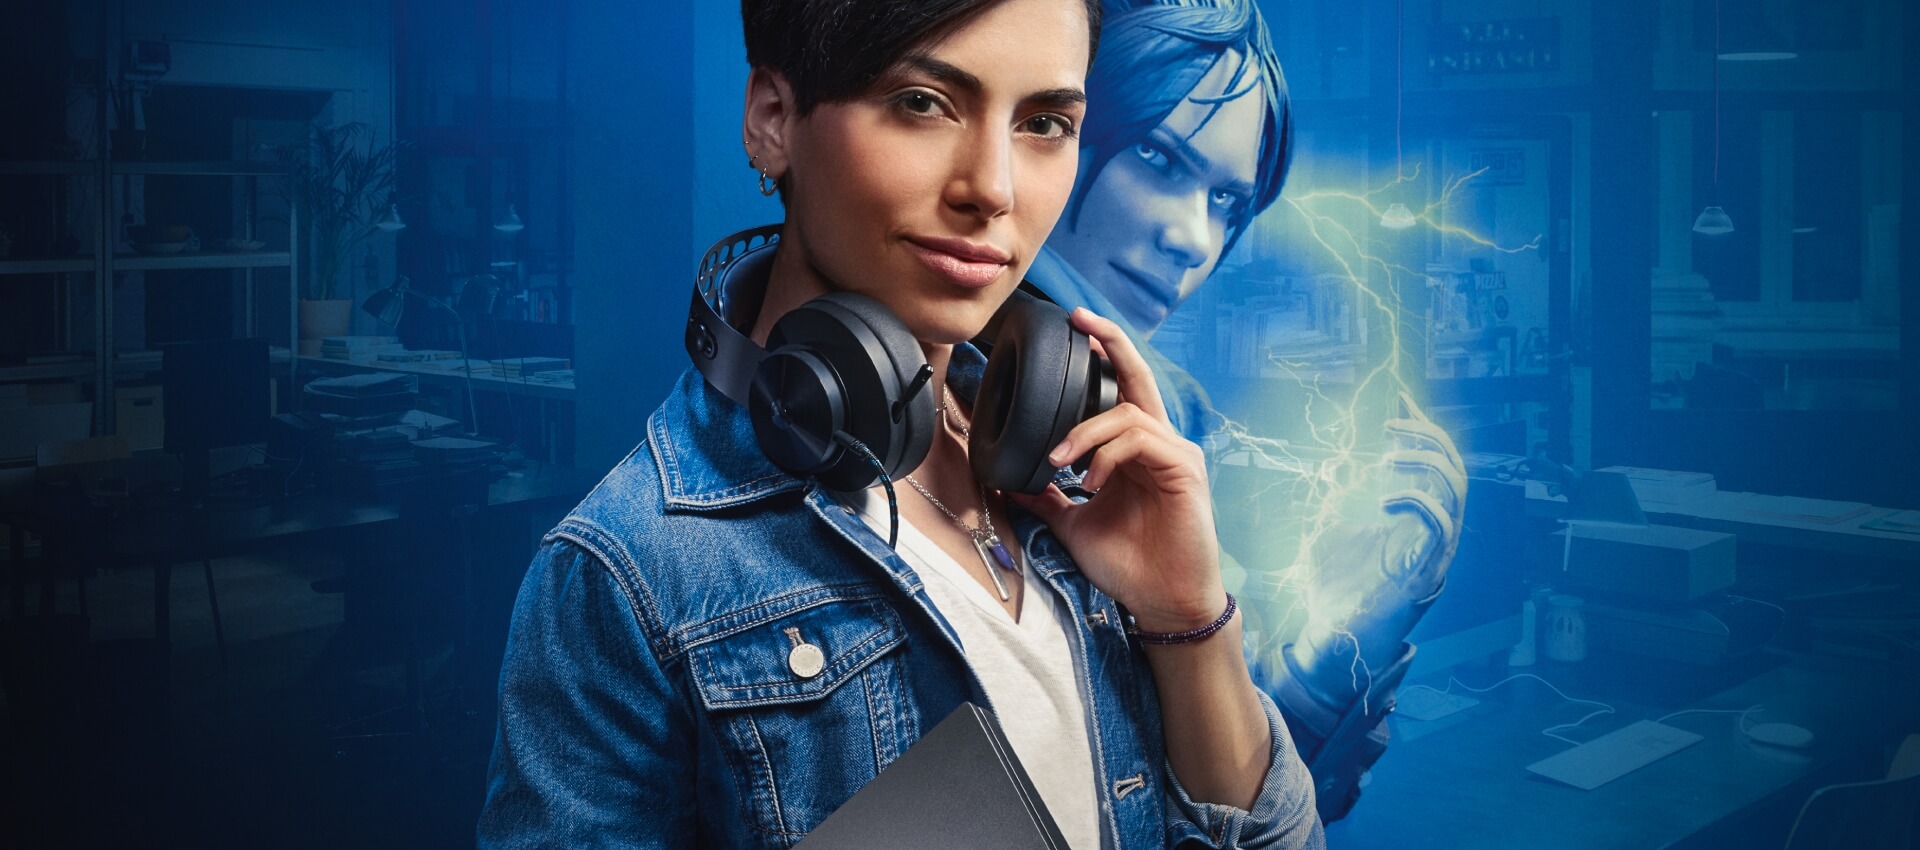 Girl with headphones holding a Lenovo Laptop, and a alter game character of her